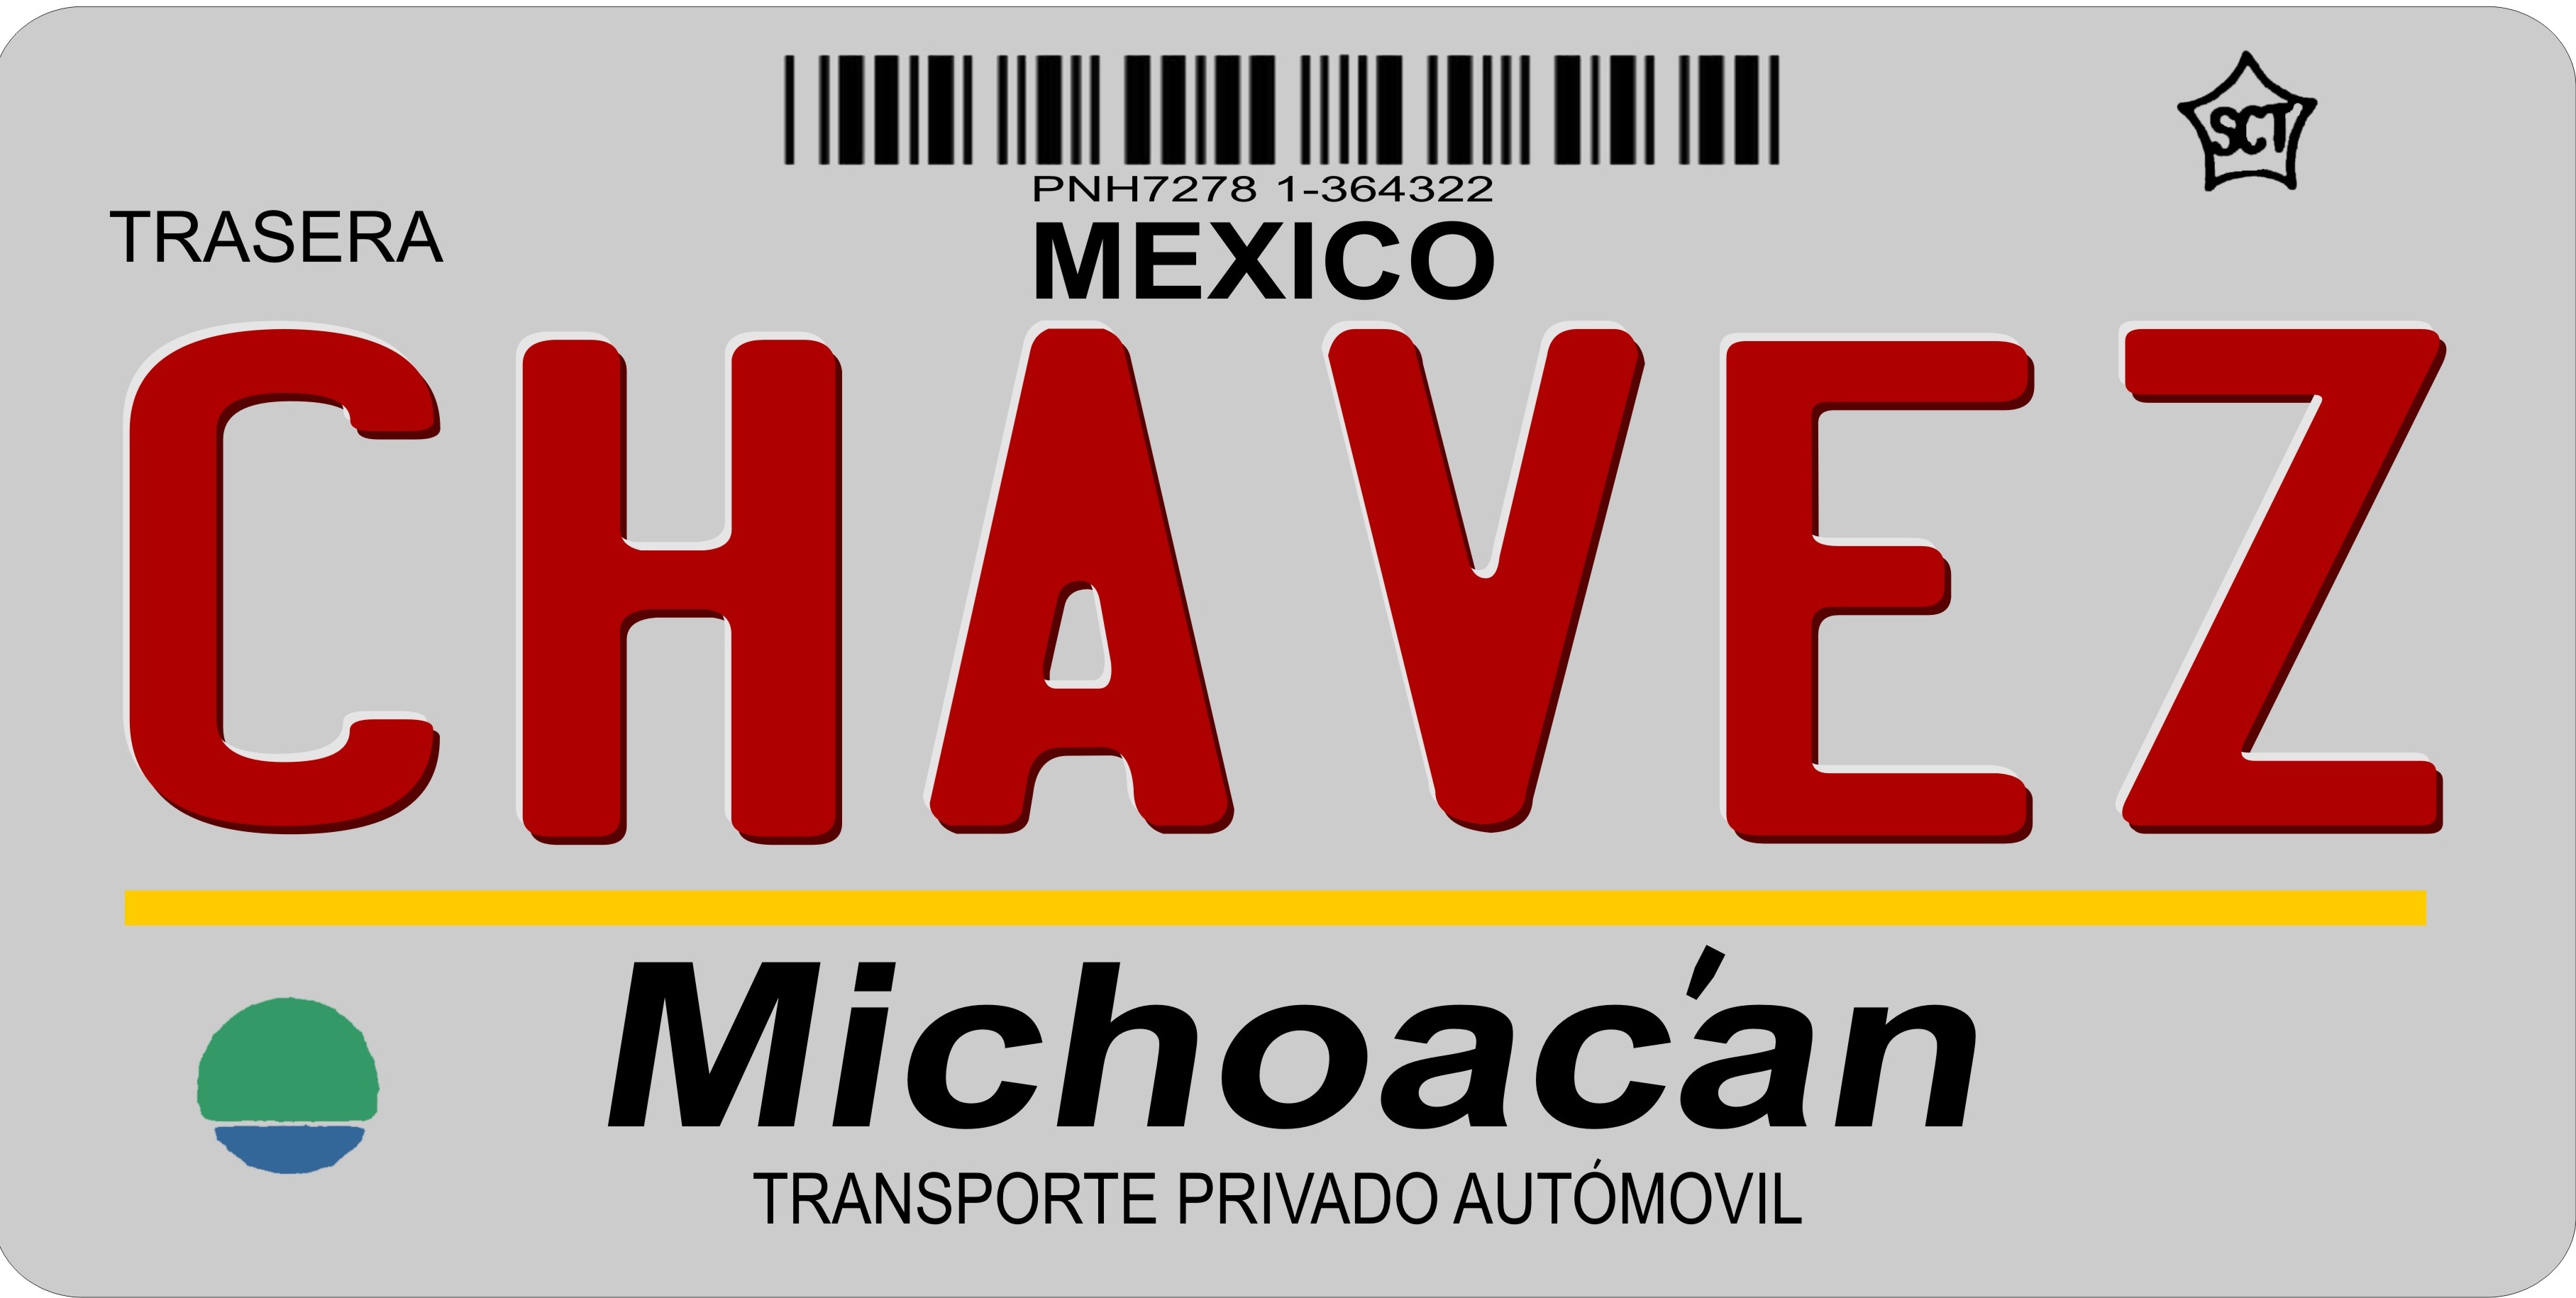 Mexico Michoacan Photo LICENSE PLATE  Free Personalization on this PLATE